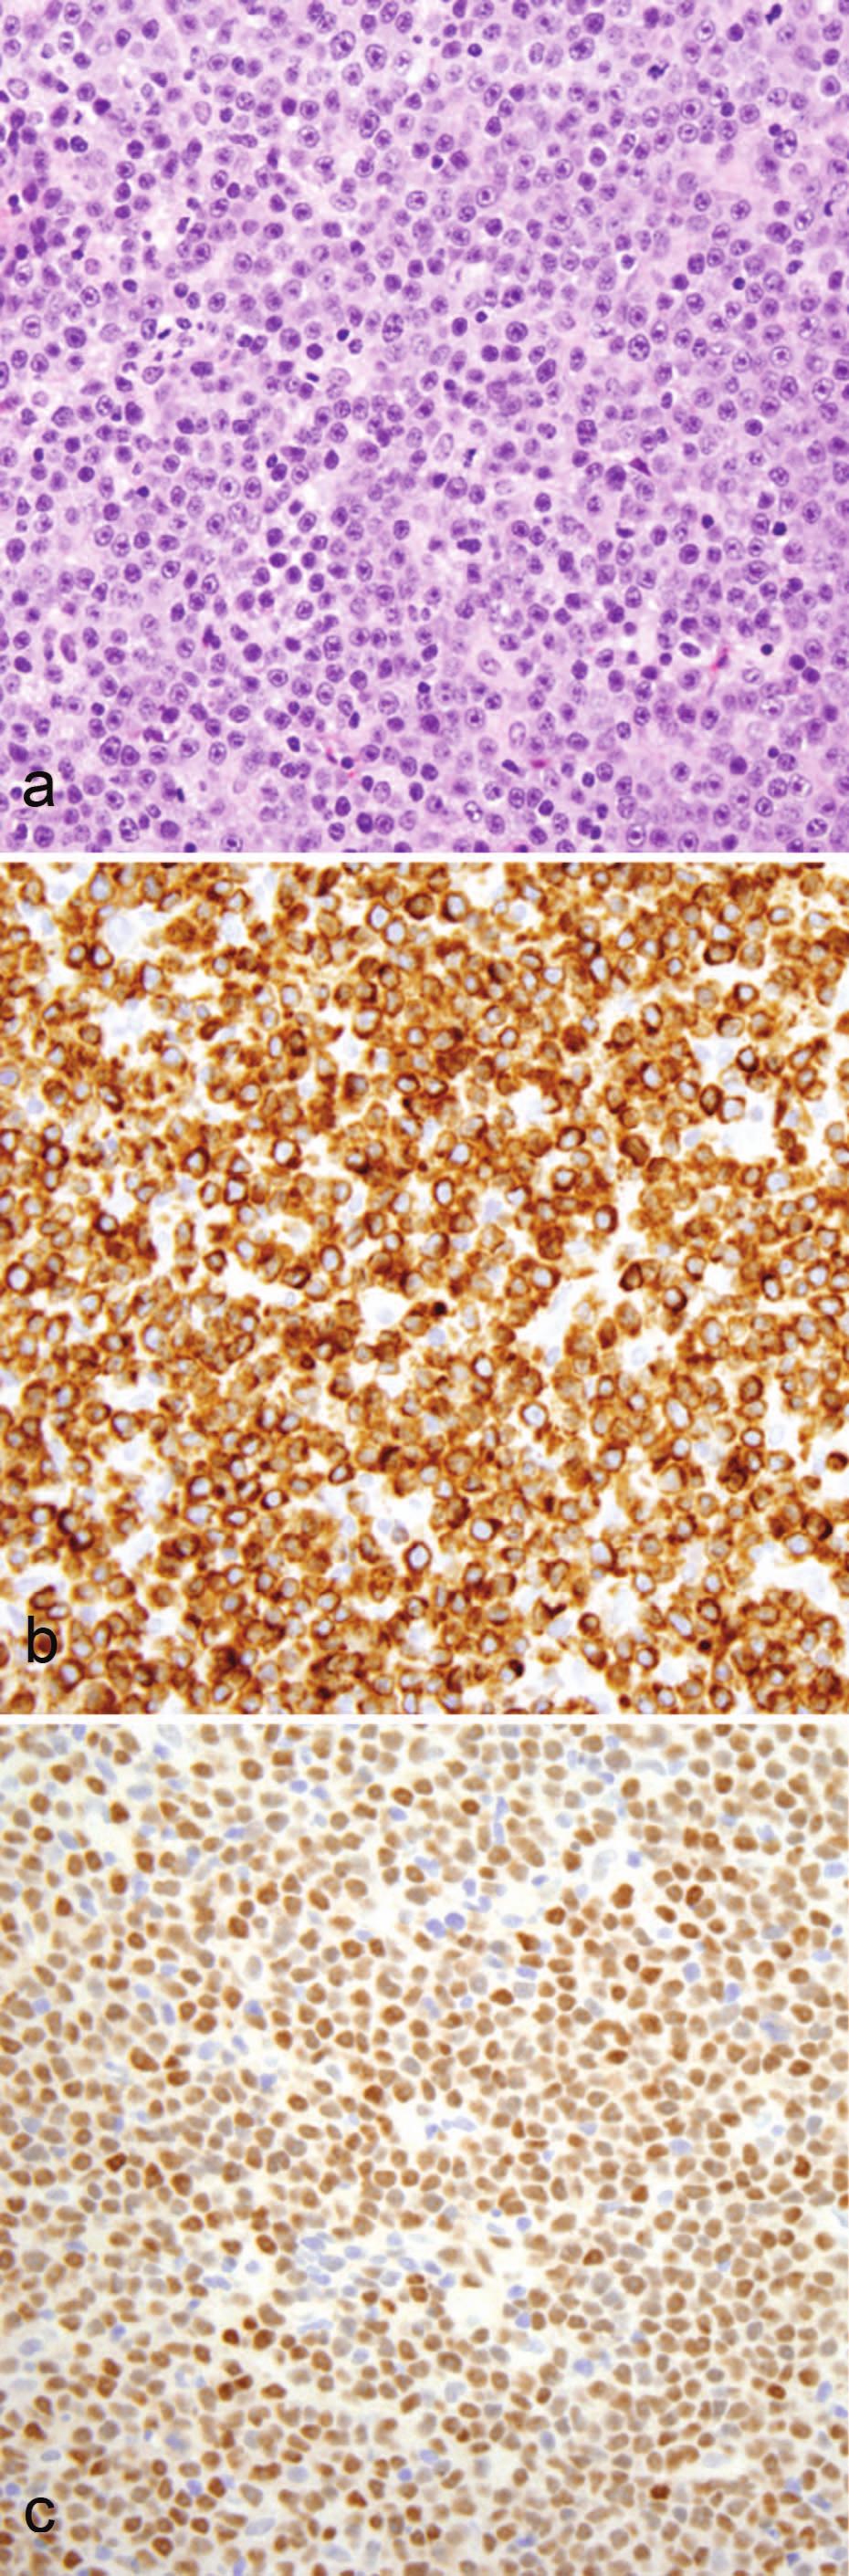 expression of BOB1 favors PMLBCL and expression of cyclin E favors CHL. Although these immunohistochemical stains are not routinely evaluated, most cases of PMLBCL express MAL, CD54, CD95, and TRAF1.